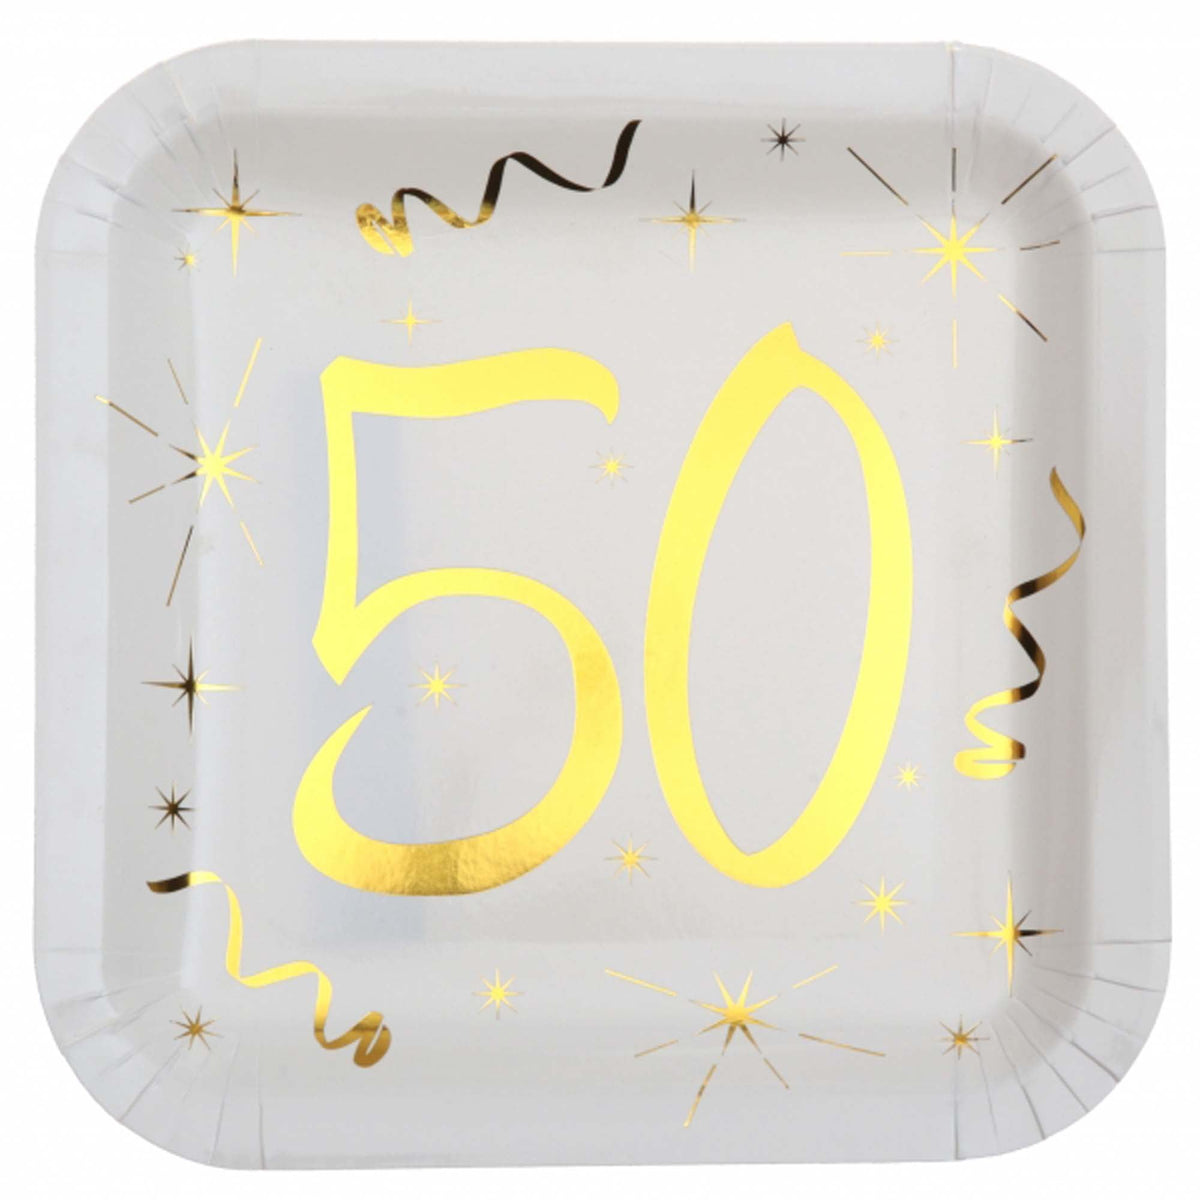 SANTEX General Birthday Starry Golden Age 50th Birthday Large Square Lunch Paper Plates, 9 Inches, 10 Count 3660380040415